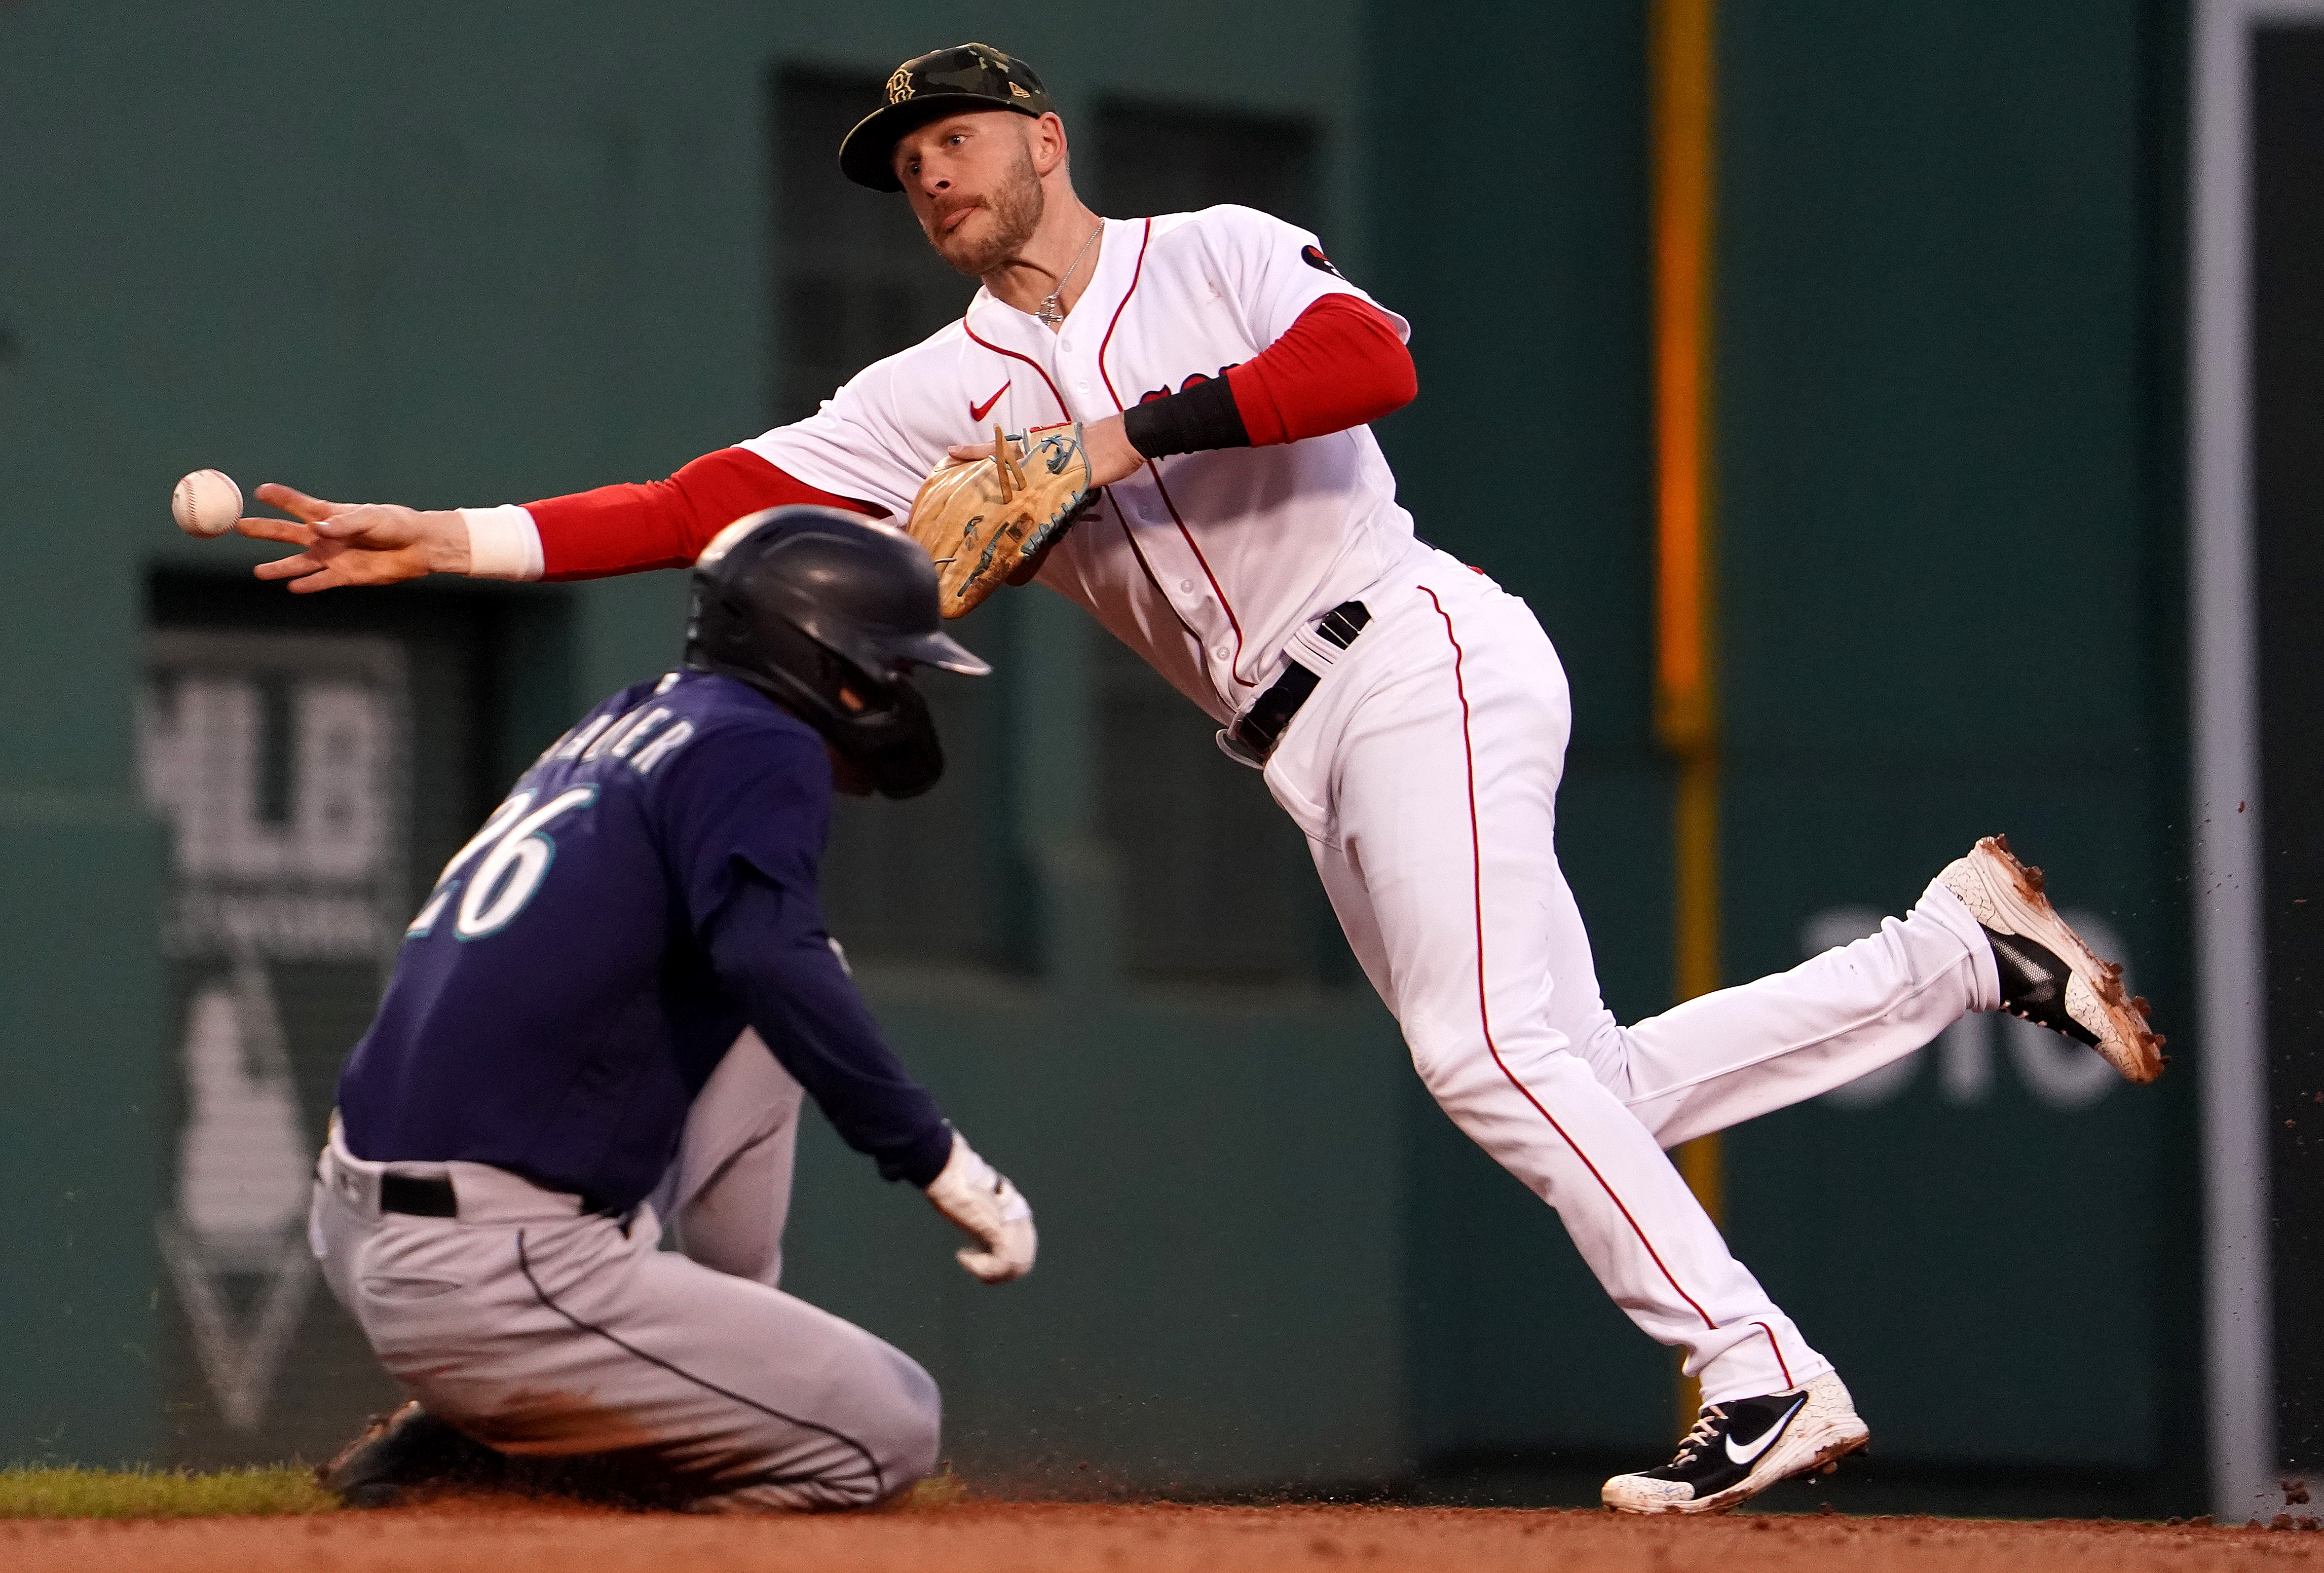 Red Sox infielder Trevor Story underwent elbow surgery, out indefinitely